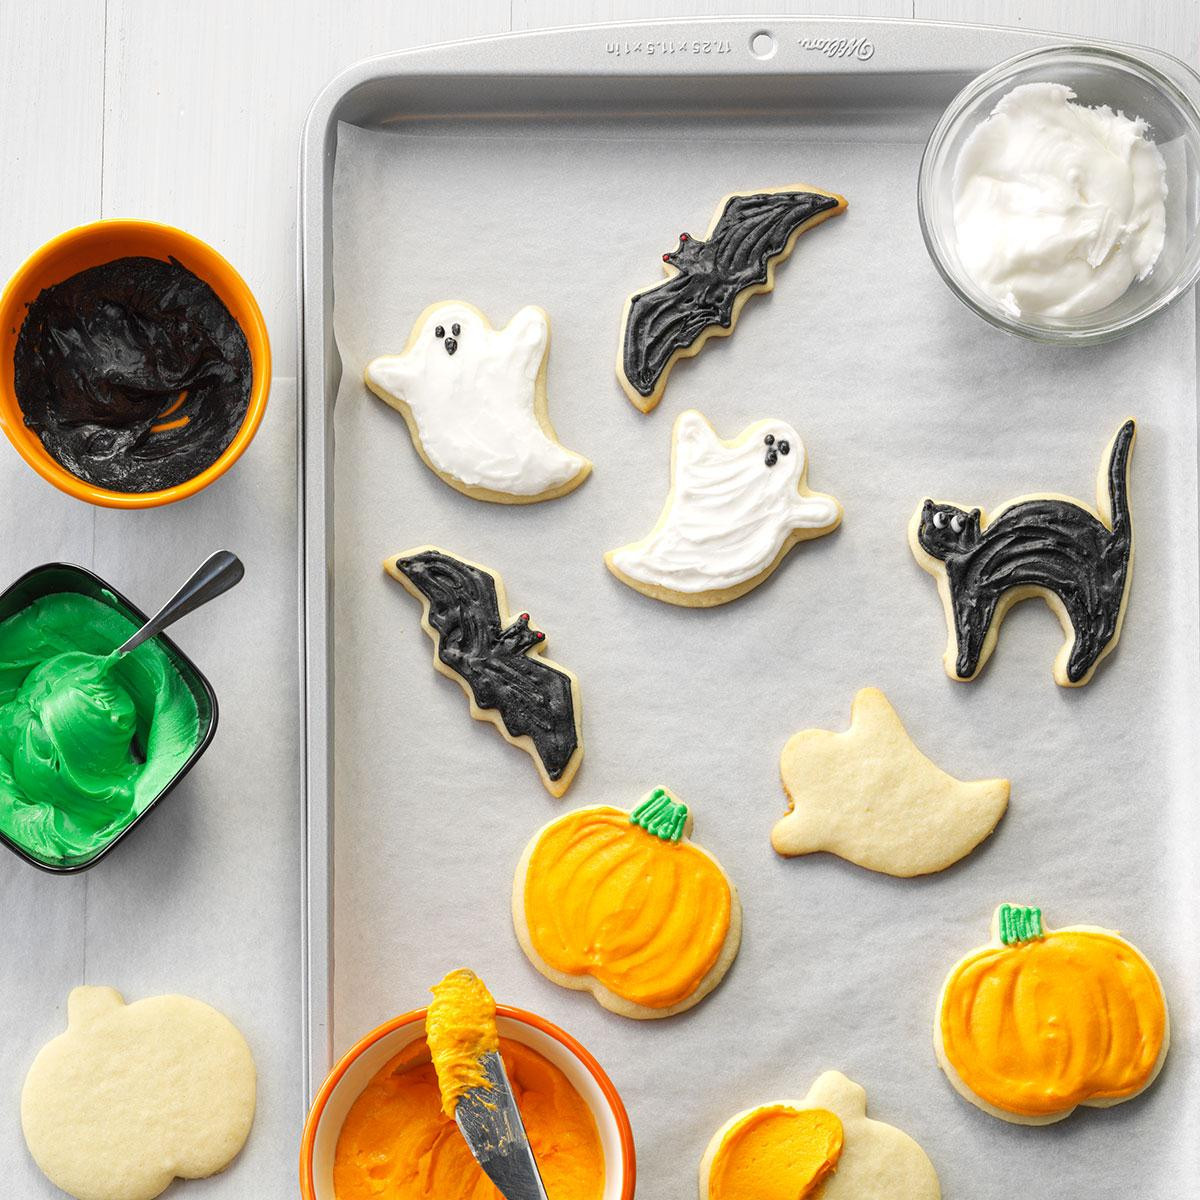 Halloween Cut Out Cookies
 Halloween Party Cutout Cookies Recipe